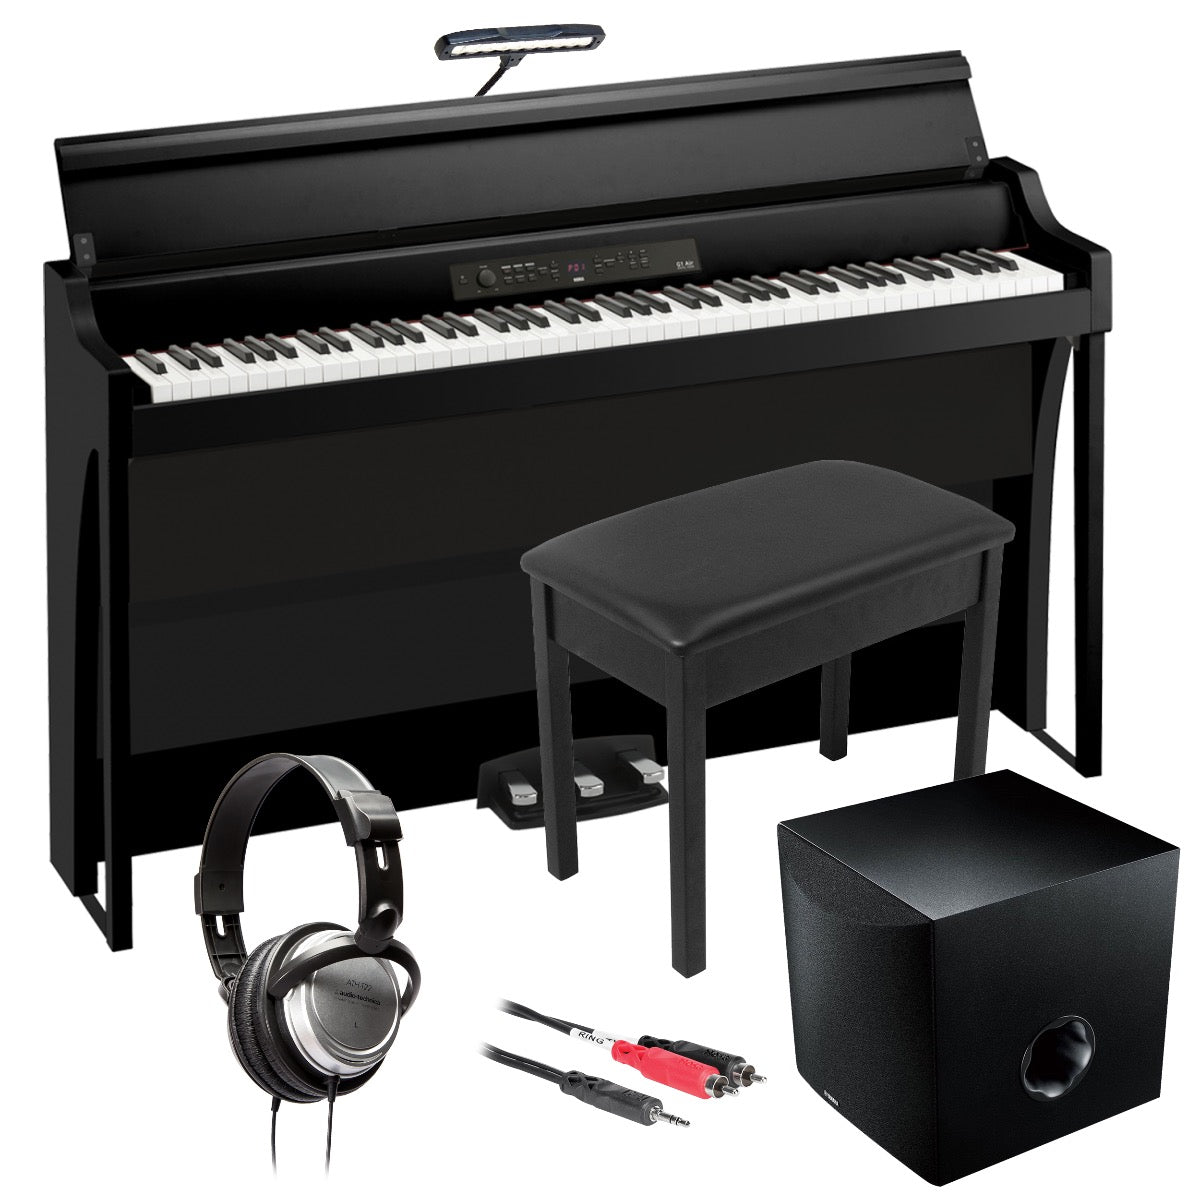 Image of piano with the bundled accessories